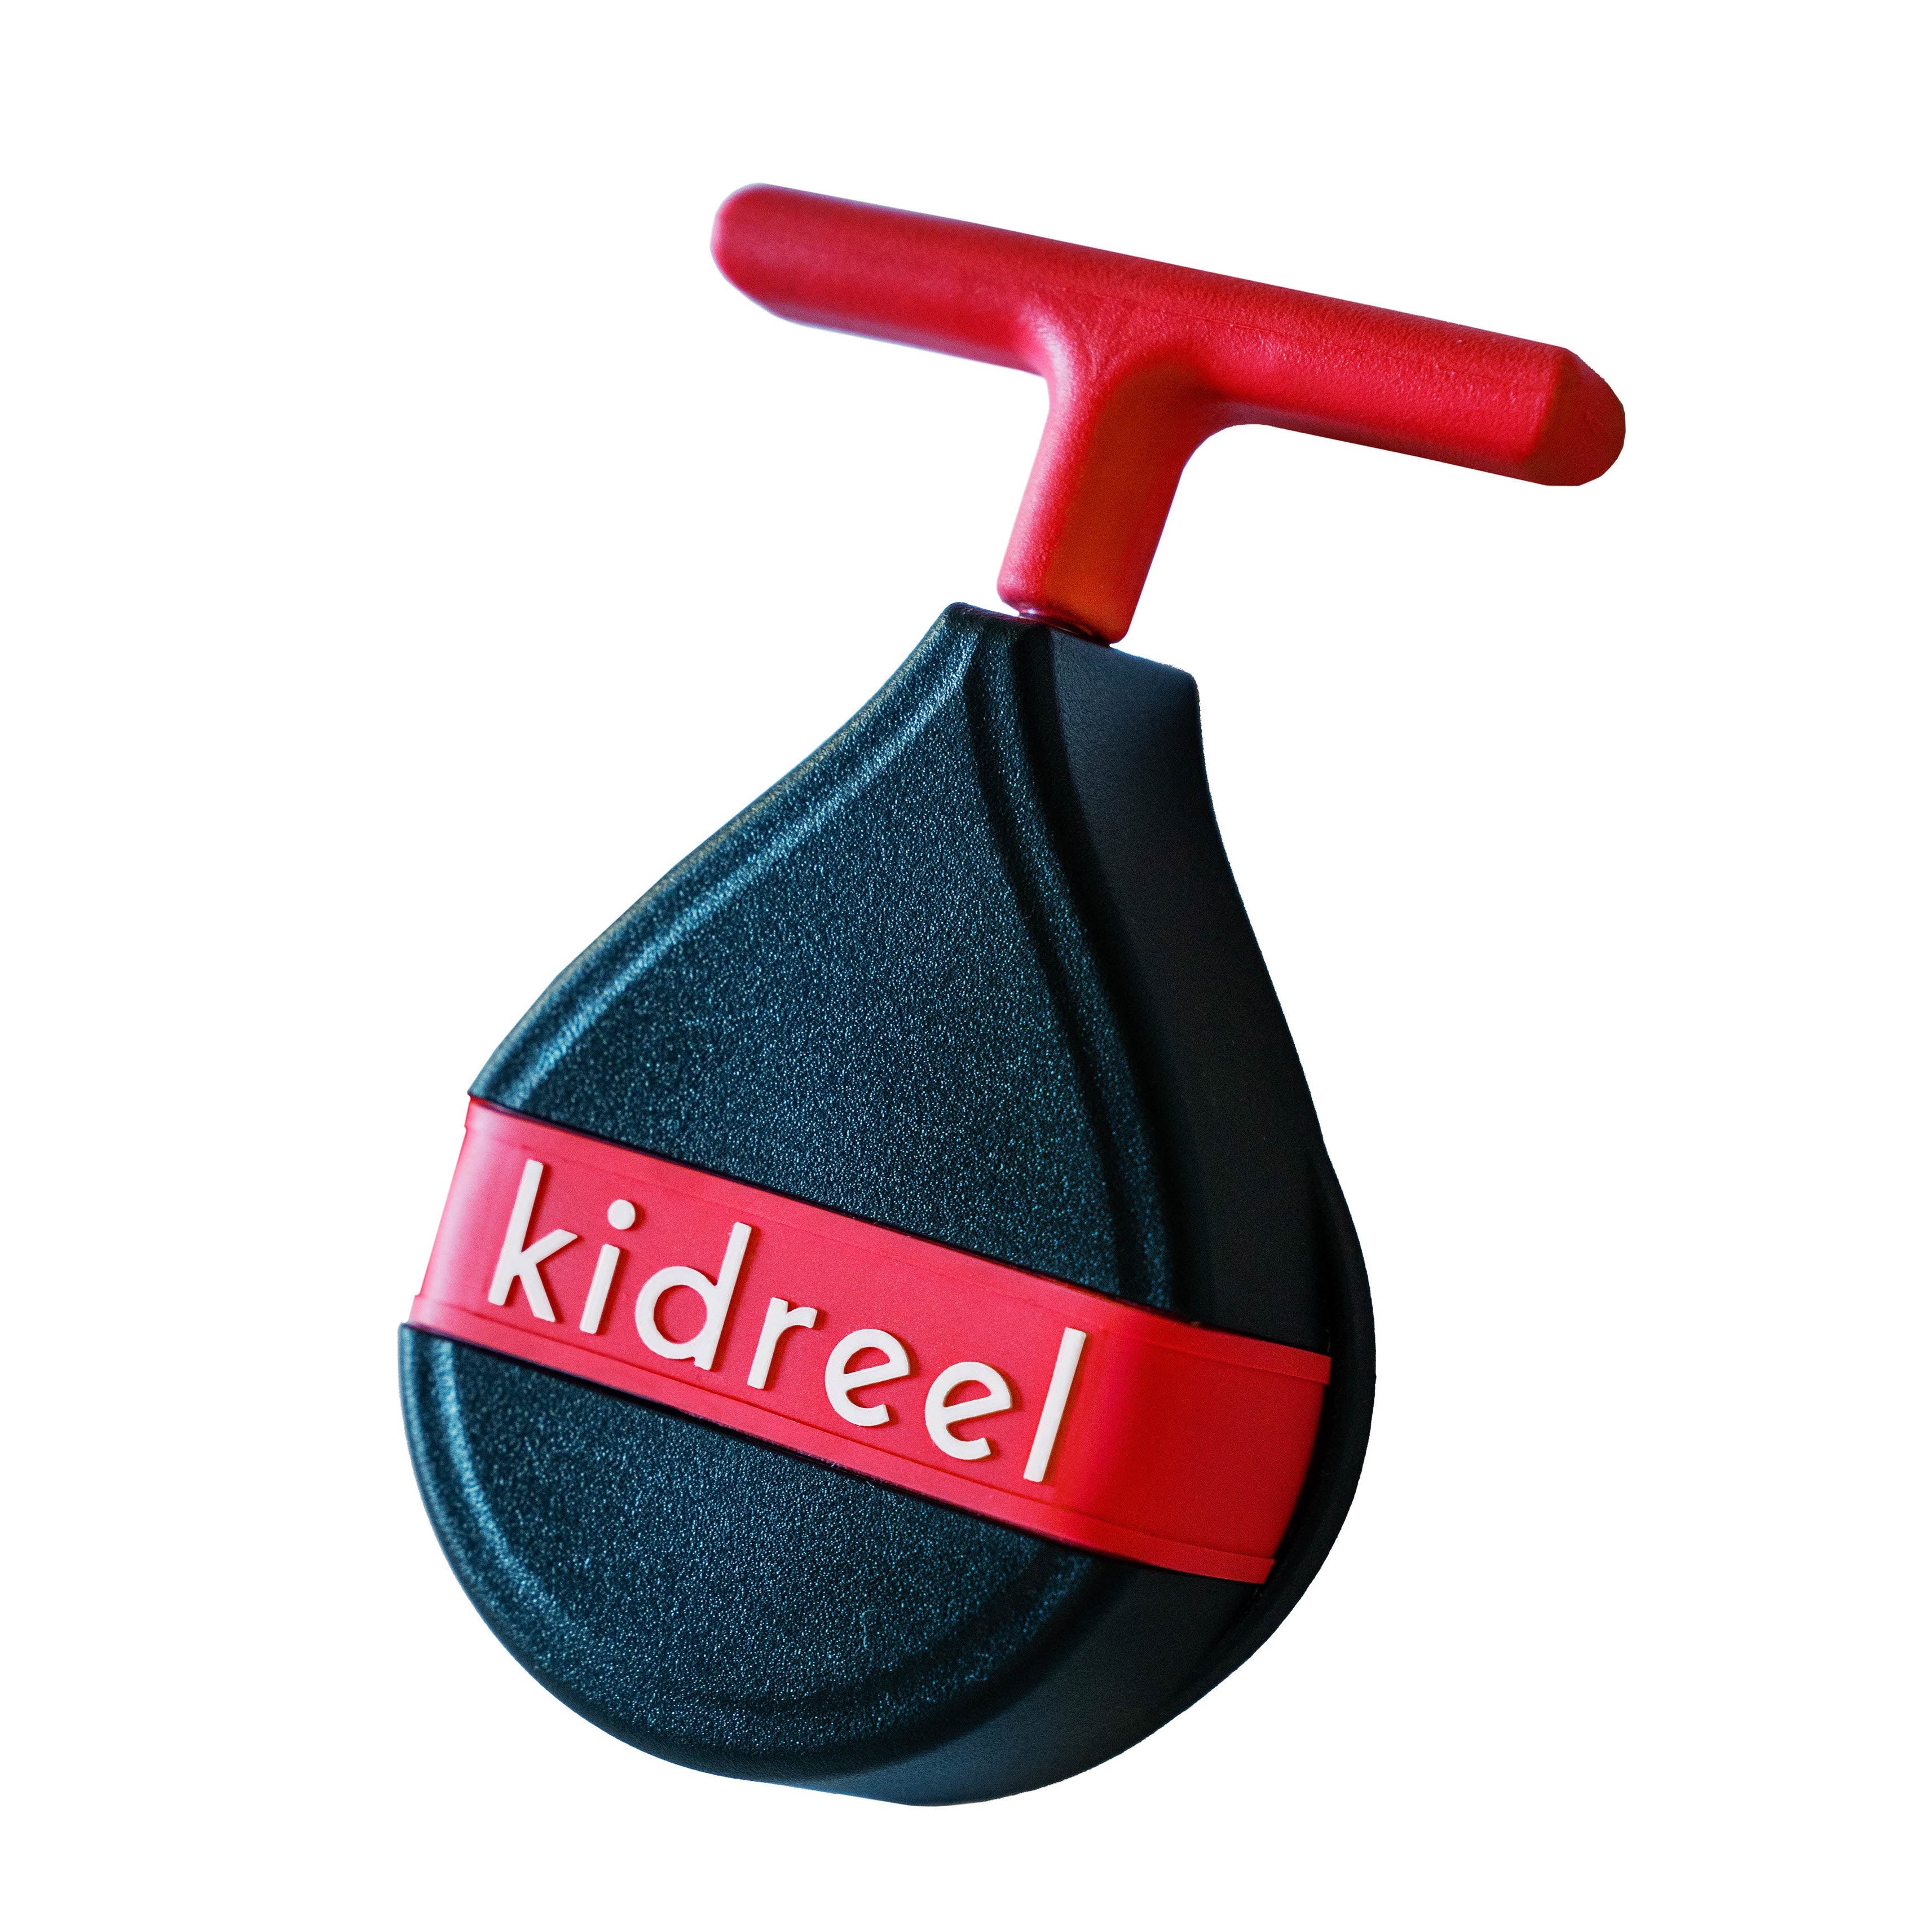 The Kidreel - Two Pack